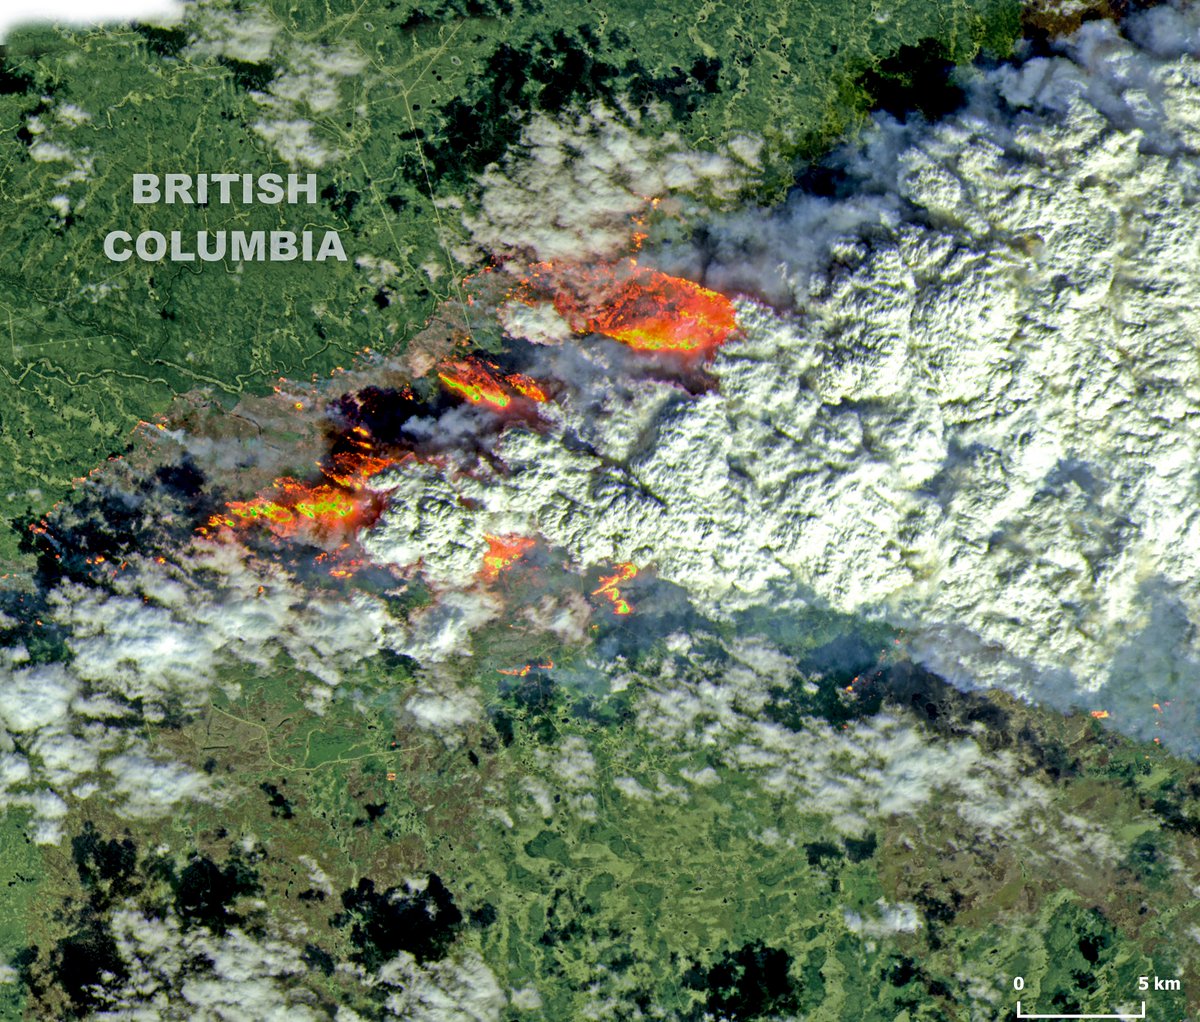 🔴⚠️🔥🇨🇦A significant #drought in #winter time boosts a tremendous start of #wildfires in W.#Canada. Fires are reported in #Alberta & #BritishColumbia,with smoke already engulfing towns like #FortNelson,60km W from the #wildfire in the #Landsat 9 📸of May10 #ClimateEmergency 1/2